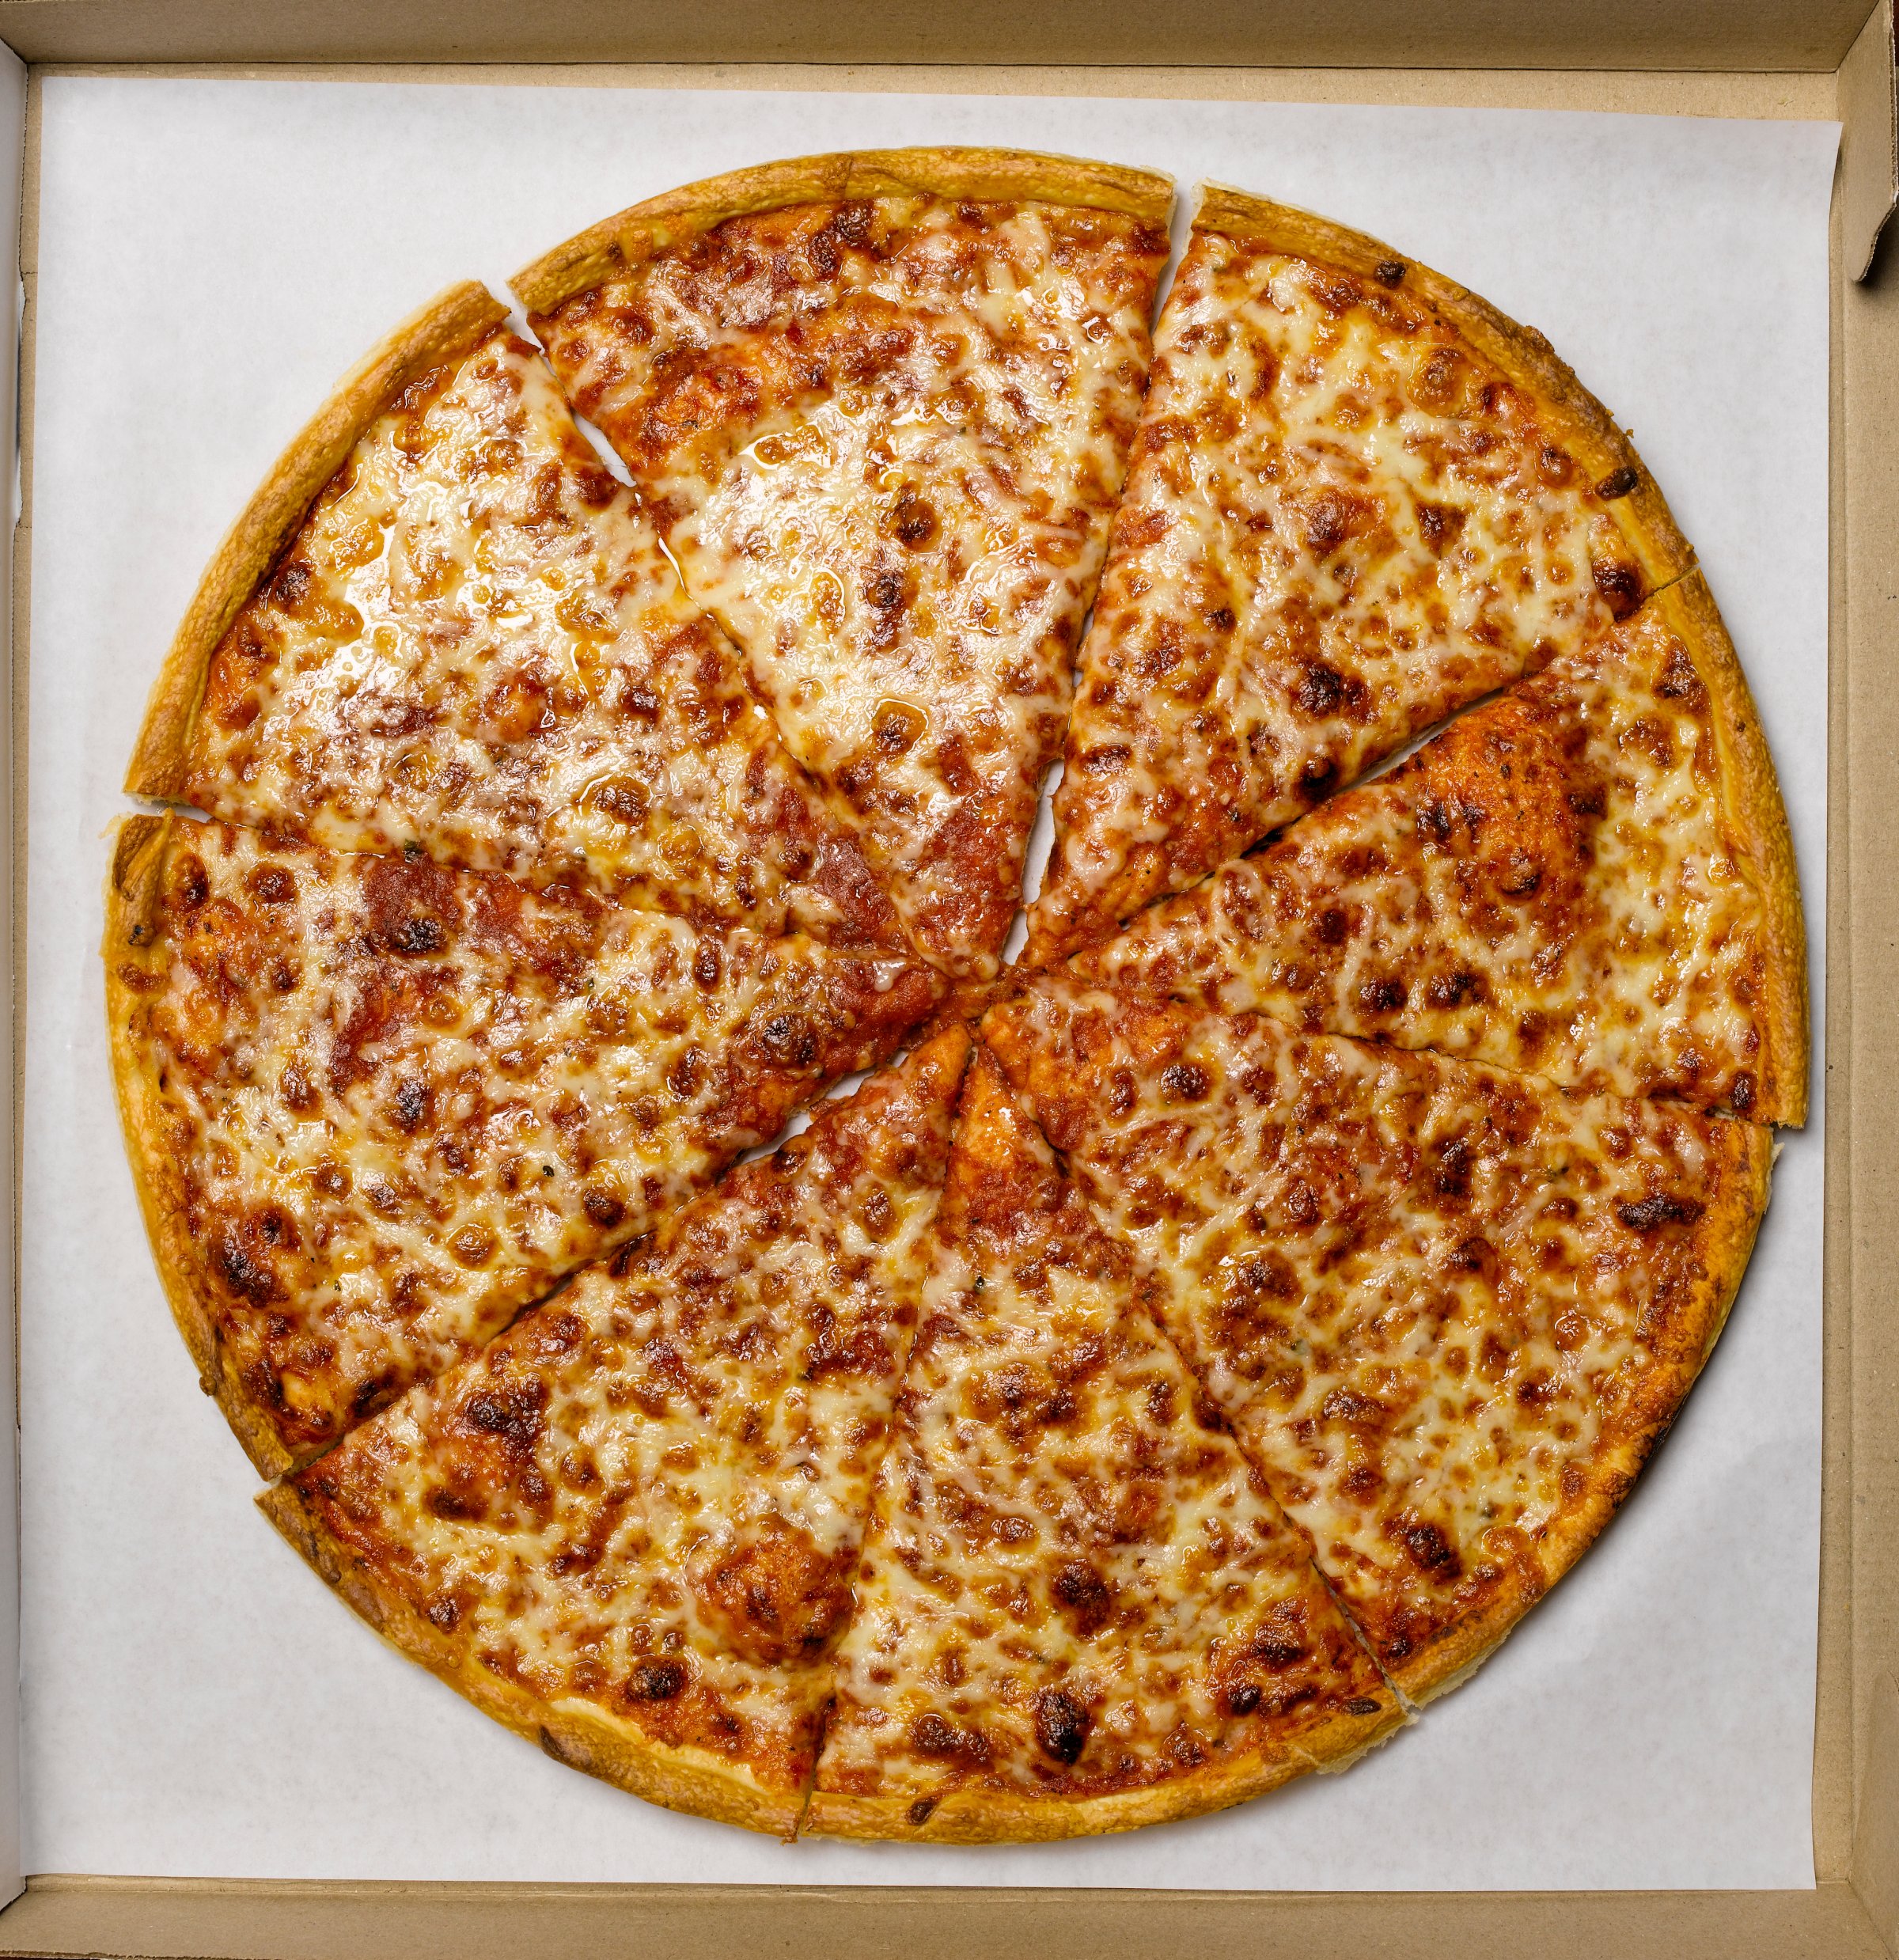 Whole pizza in box, overhead view